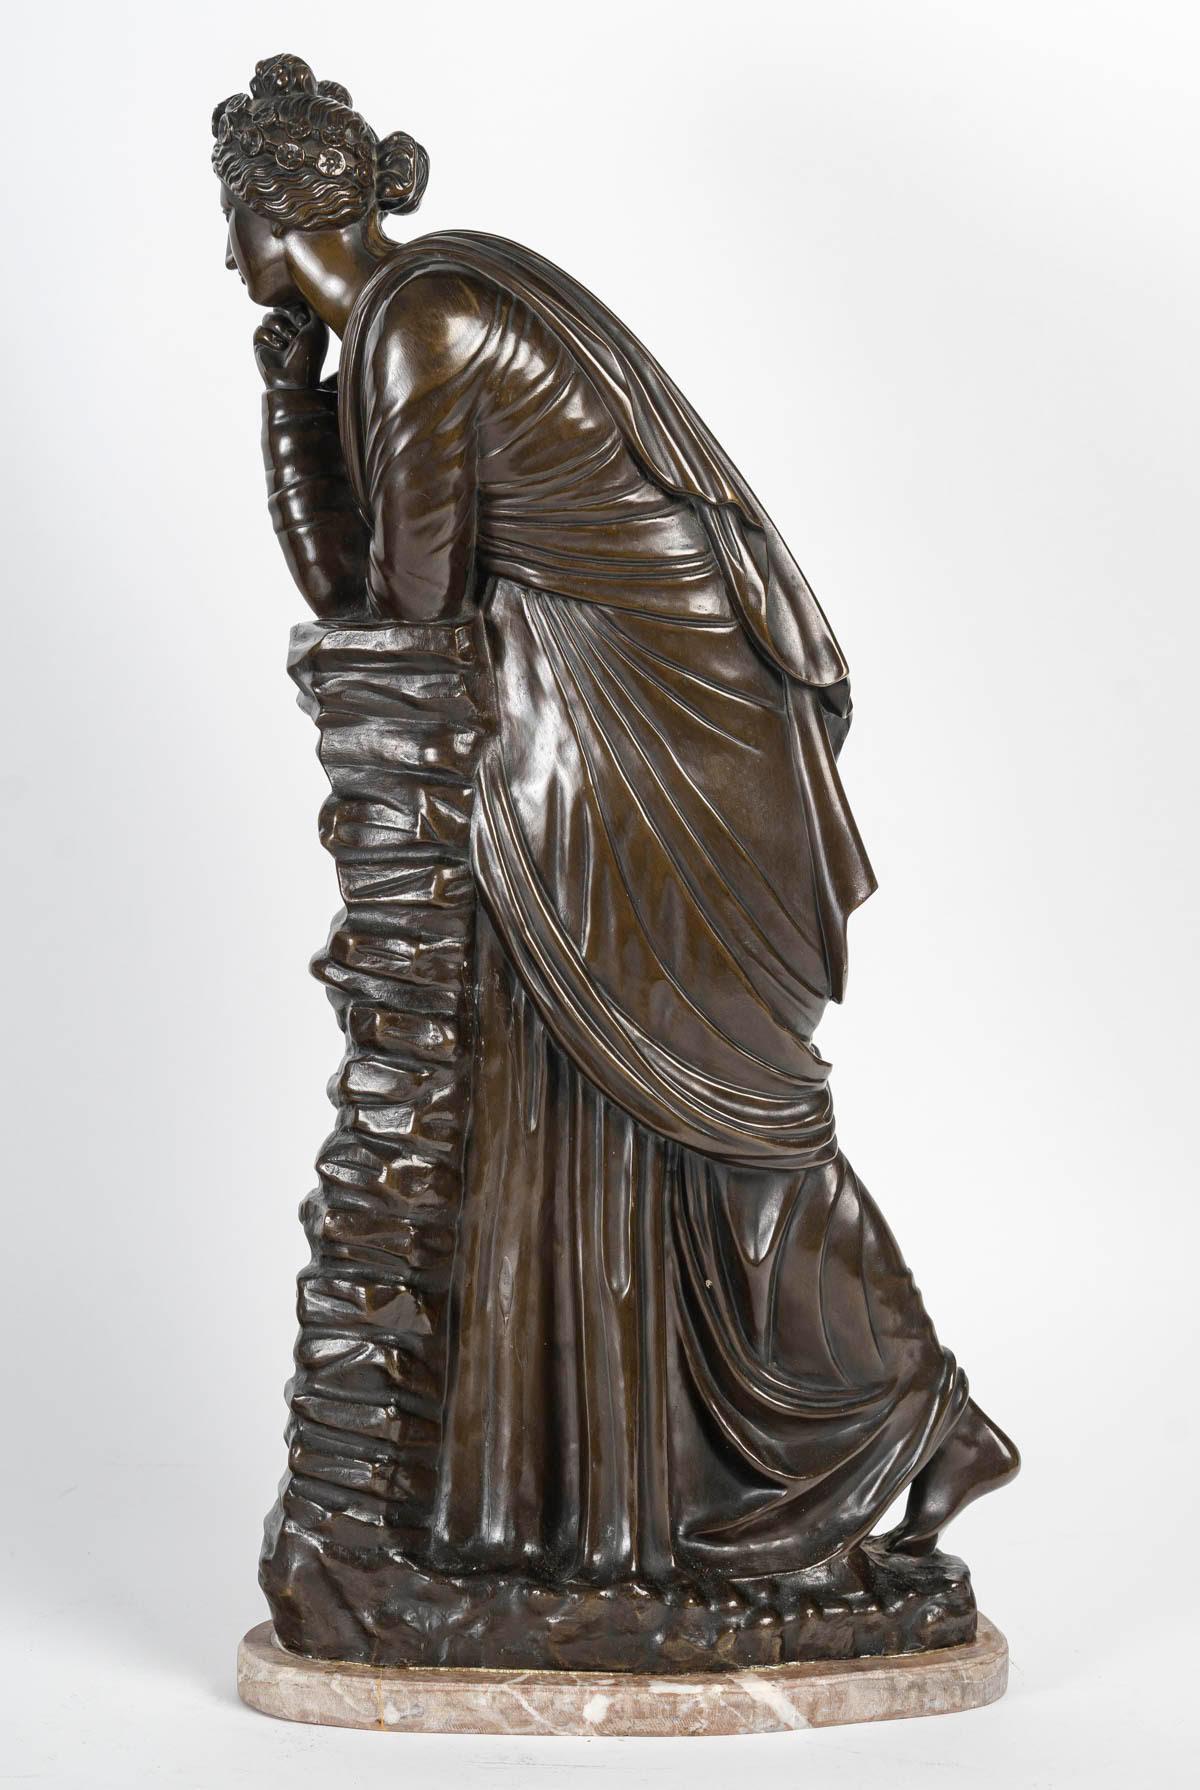 Bronze sculpture, signed F. Barbedienne, 19th century, Napoleon III period.

Bronze sculpture, marble base, mechanical reproduction, signed F. Barbedienne, foundryman, pretty draped woman, 19th century, Napoleon III period.
h: 58cm, w: 30cm, d: 17cm